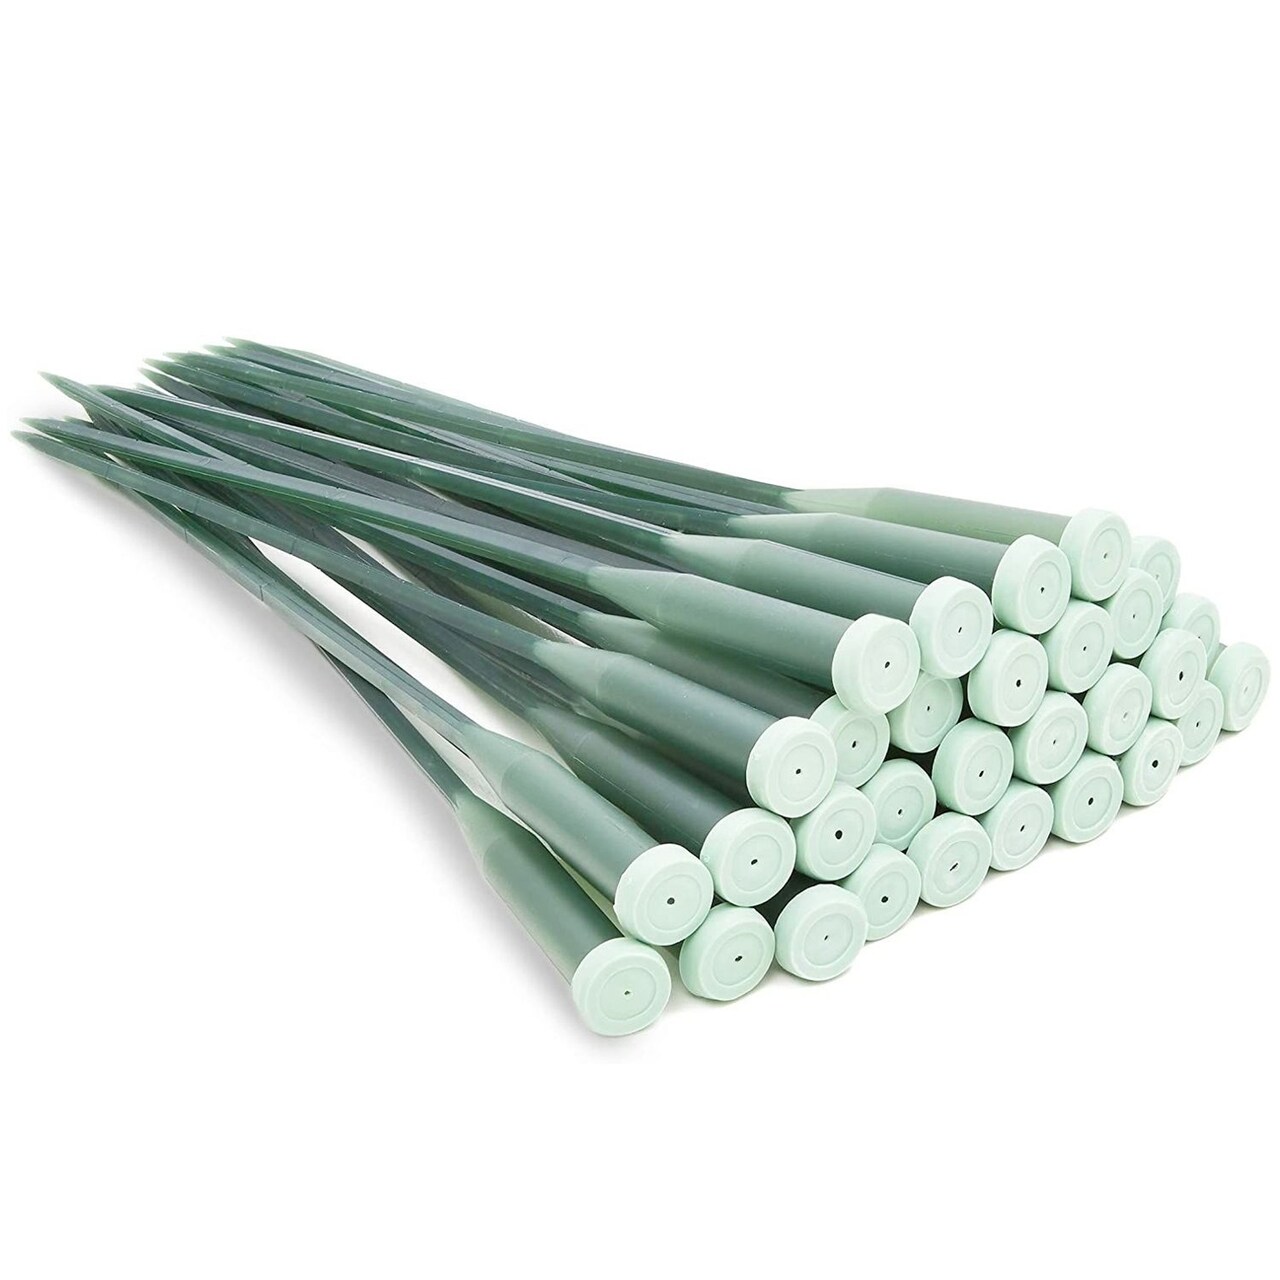 30 Pack Stem Water Tubes for Flowers with Caps, Extendable Vials